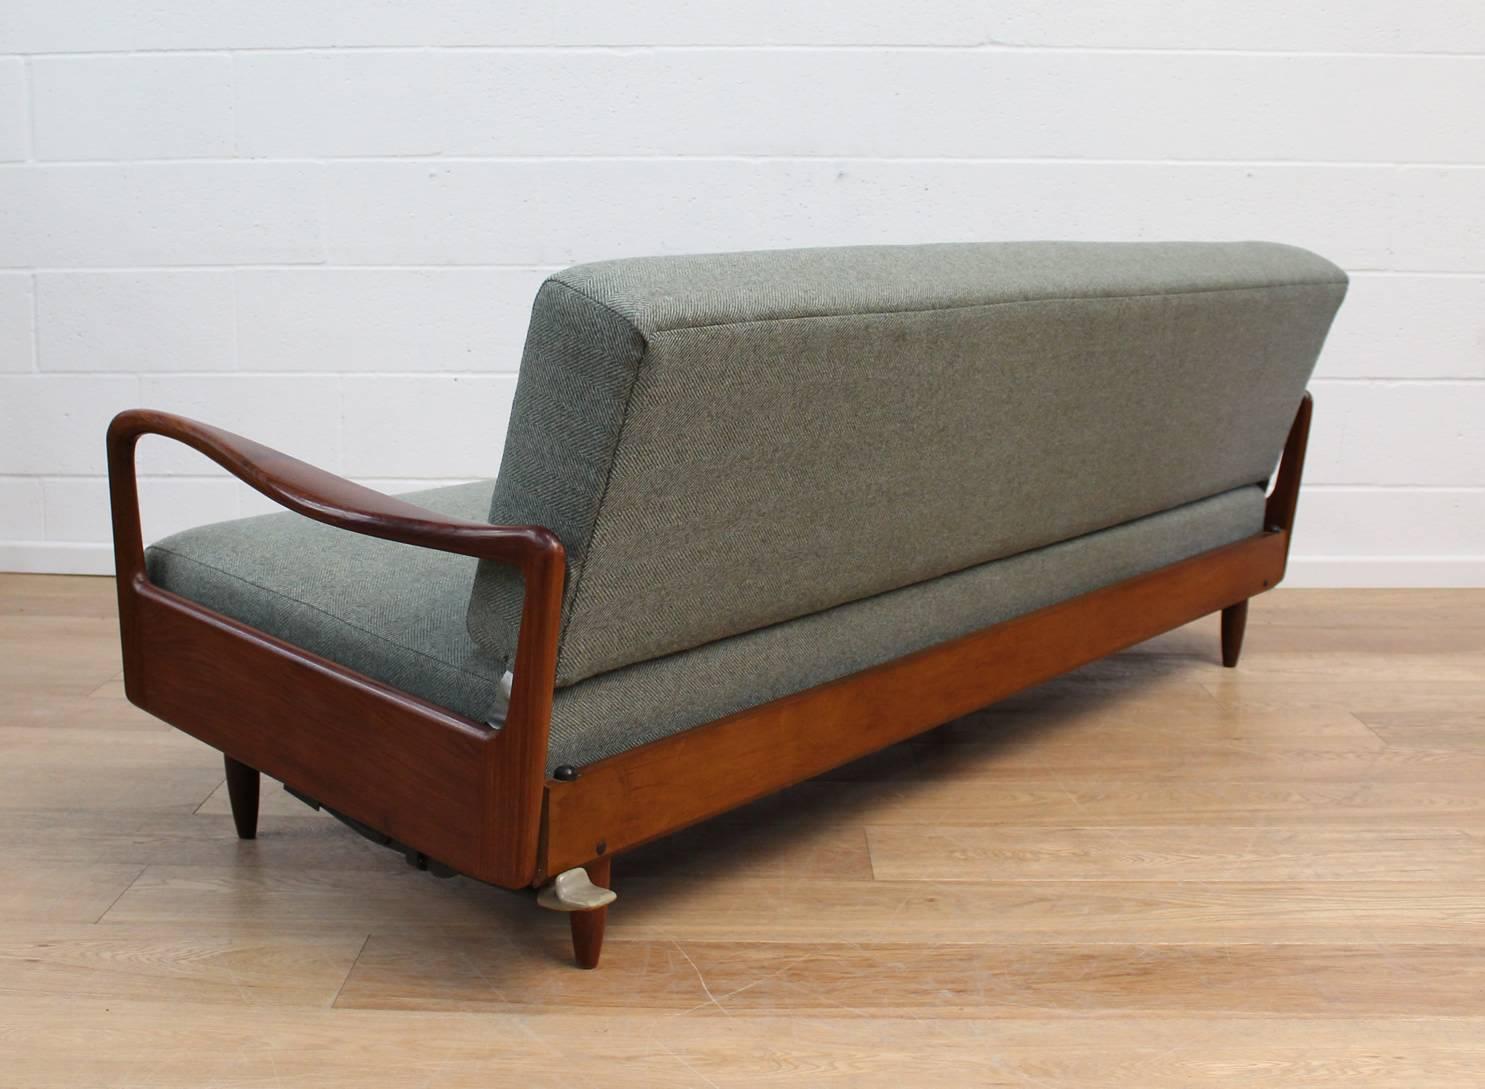 Greaves & Thomas Midcentury Sofa Bed with Teak Arms, Fully Restored in Wool 1